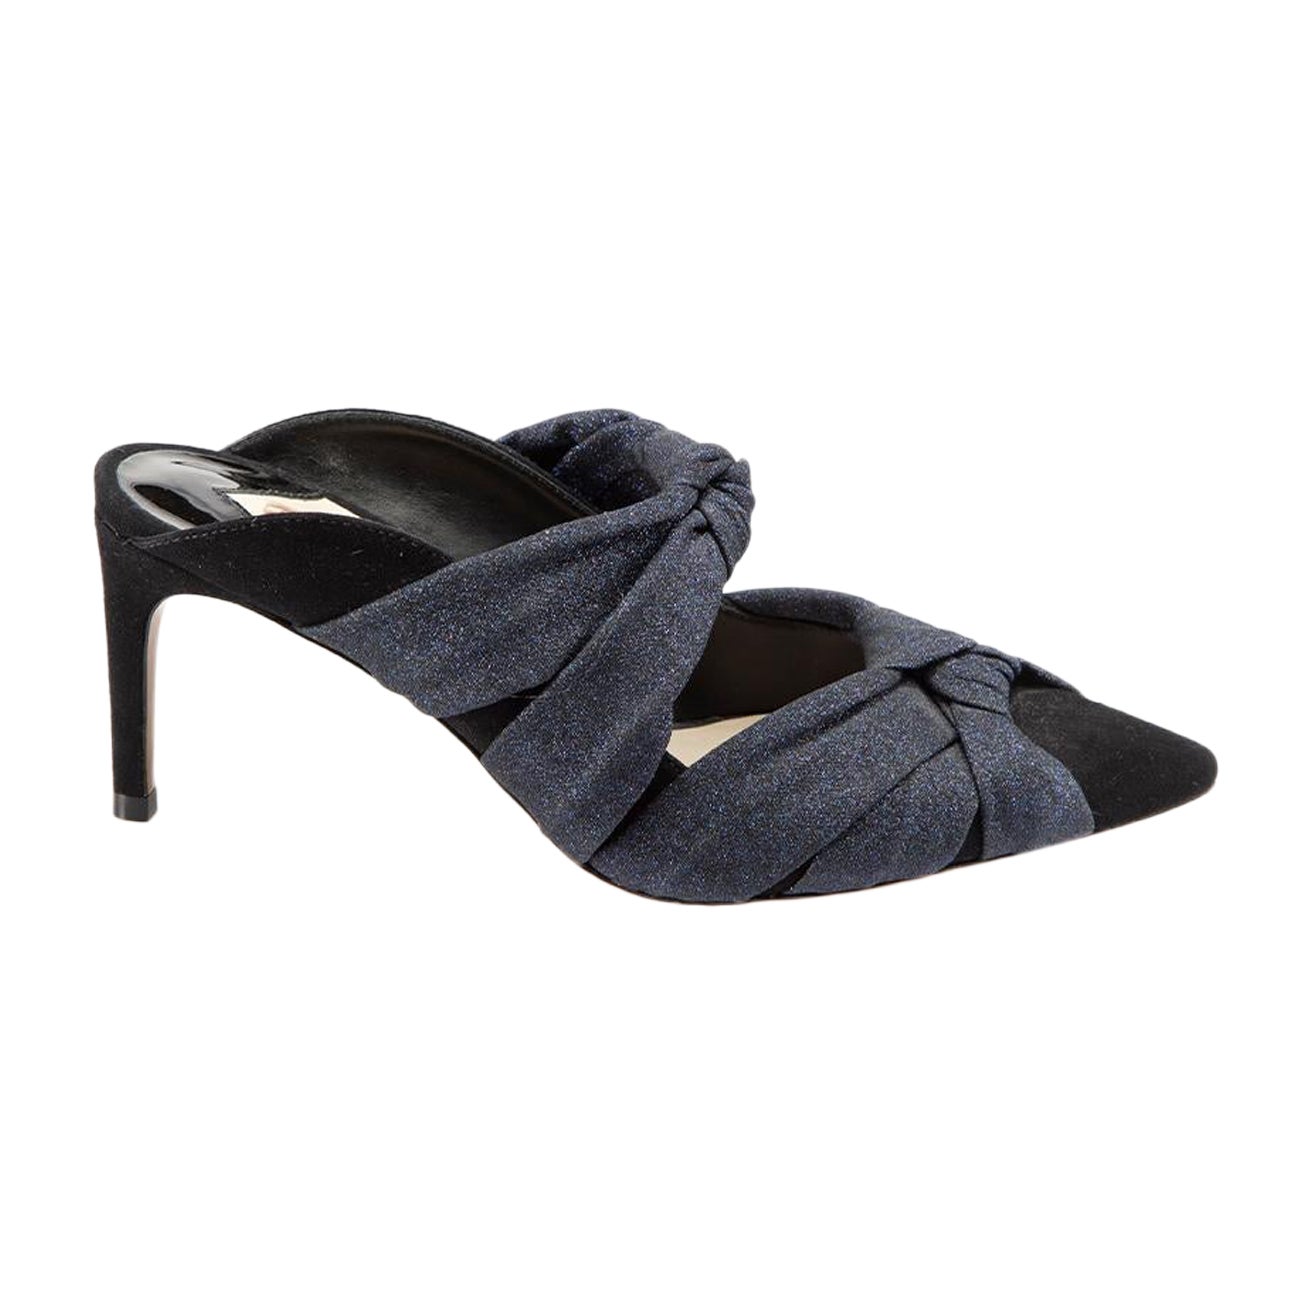 Navy Suede Leather Glitter Mules Size IT 37 For Sale